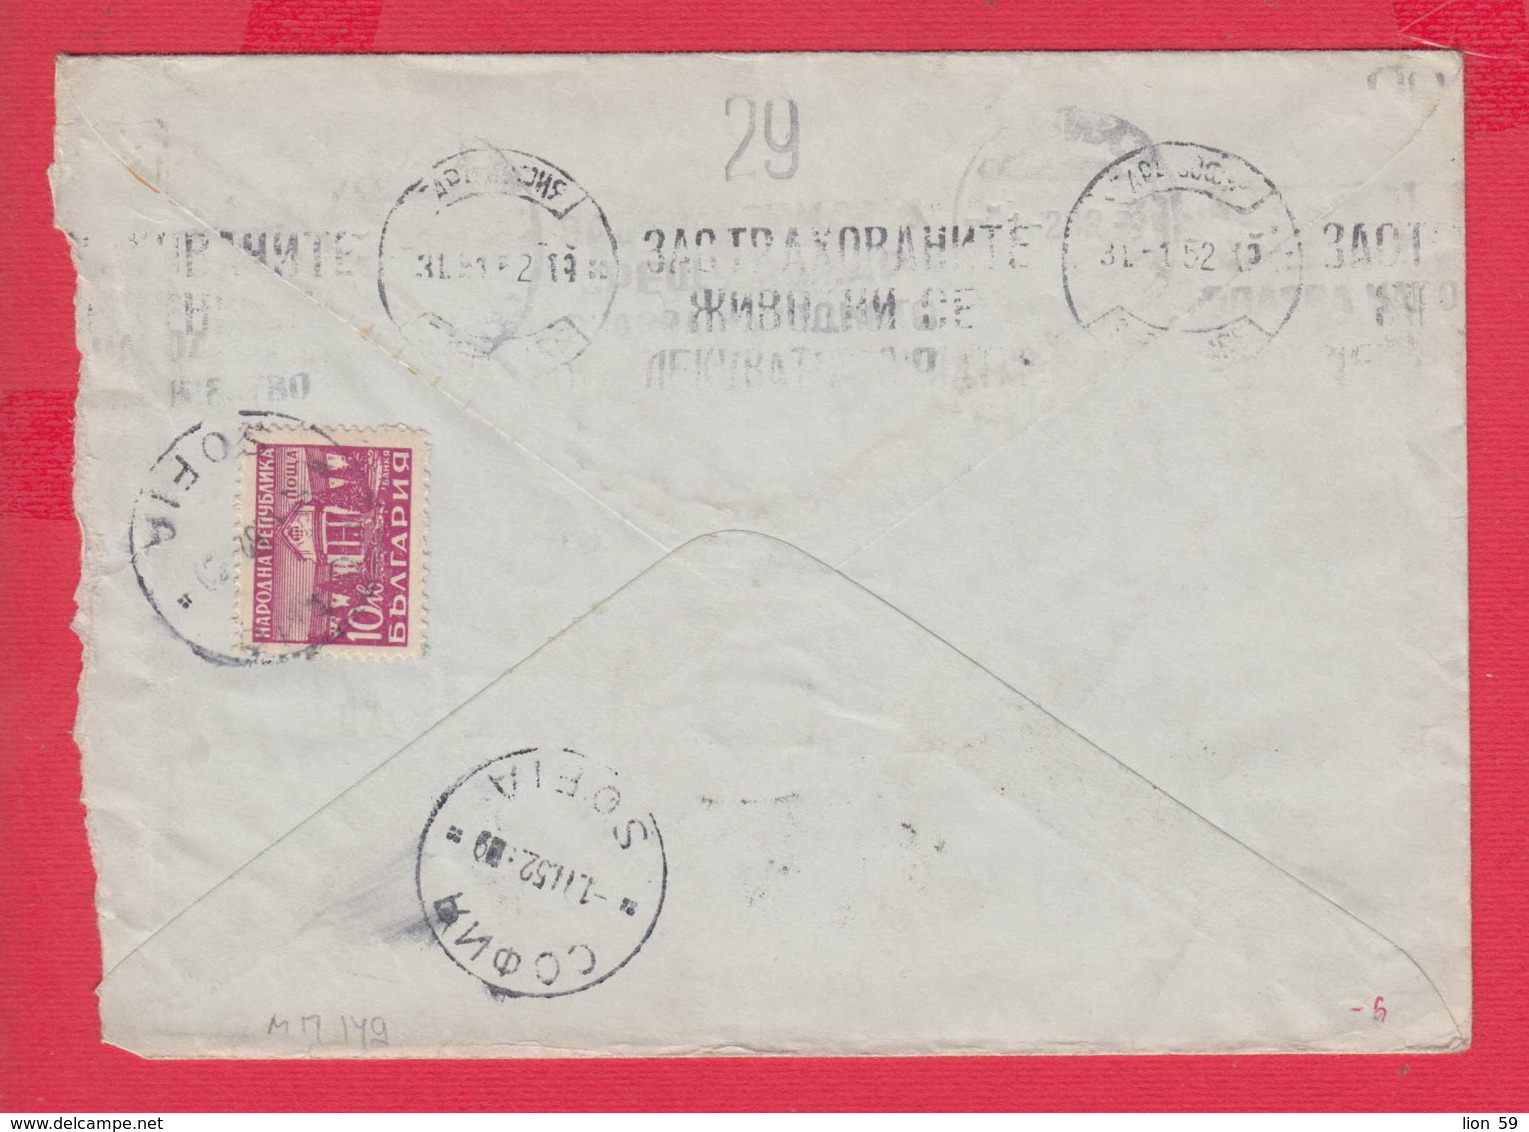 239333 / RUSSIA Stationery 1952 1p.+40 K. AIRPLANE , TO Poste Restante  10 Lv. SOFIA FLAMME  Insurance - 1950-59